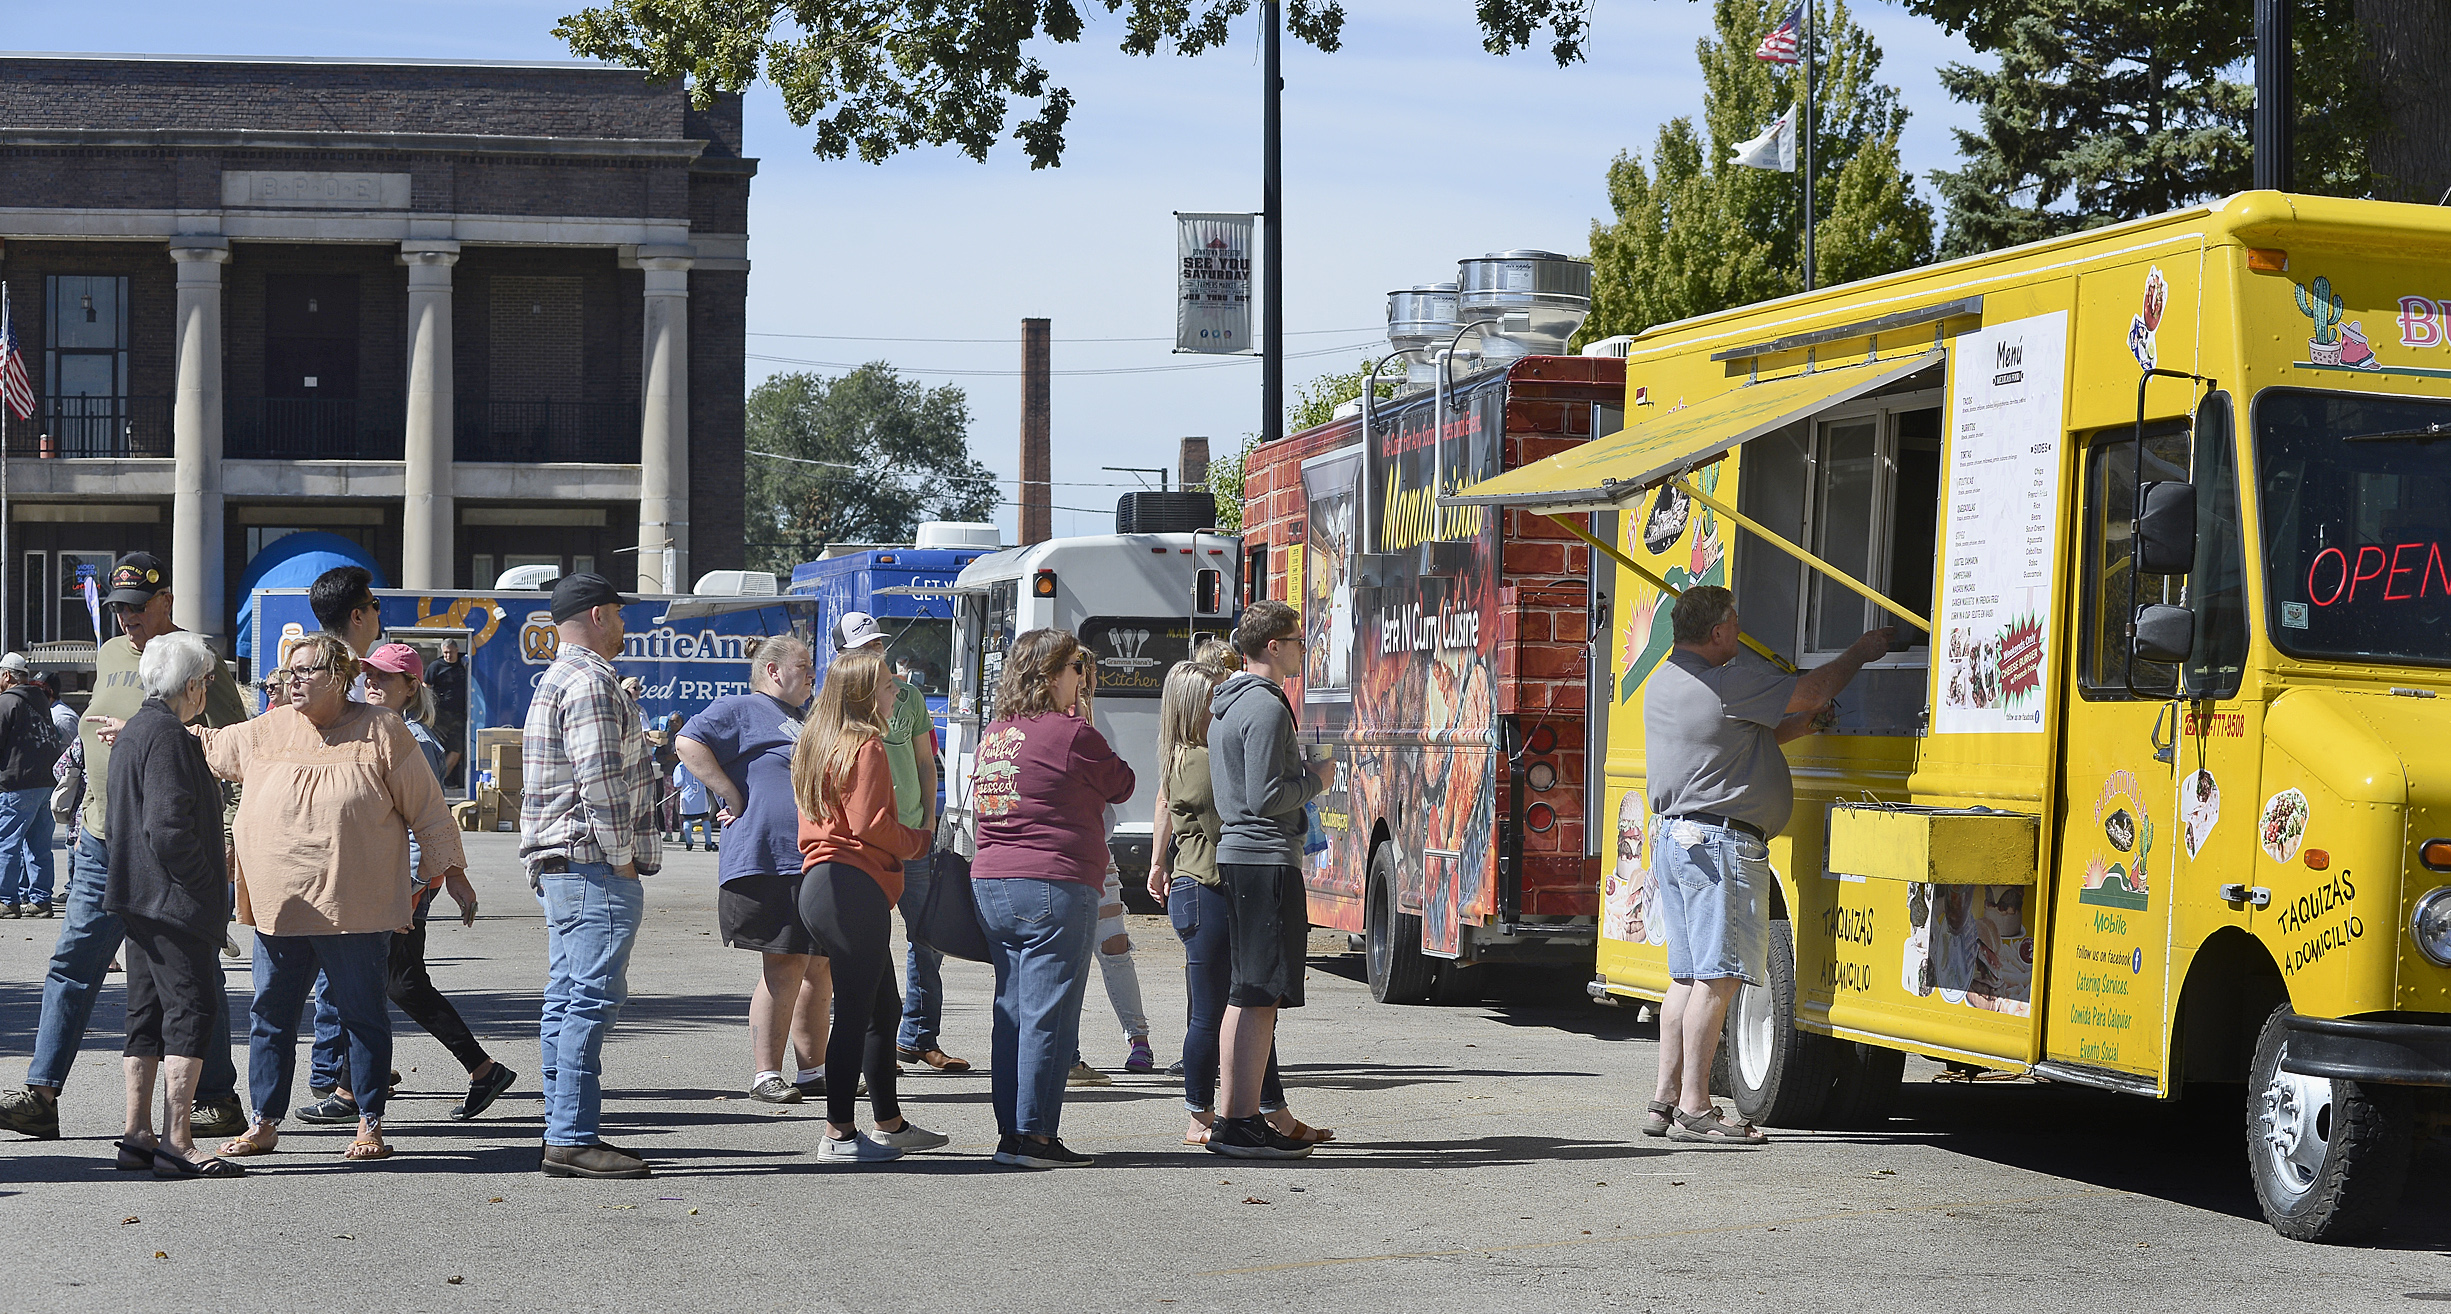 Visitors lined up for several different food offerings Saturday, Sept. 25, 2021, during the Food Truck Festival at City Park in Streator. The festival was sponsored by Streatscapes, the same group responsible for Walldogs.